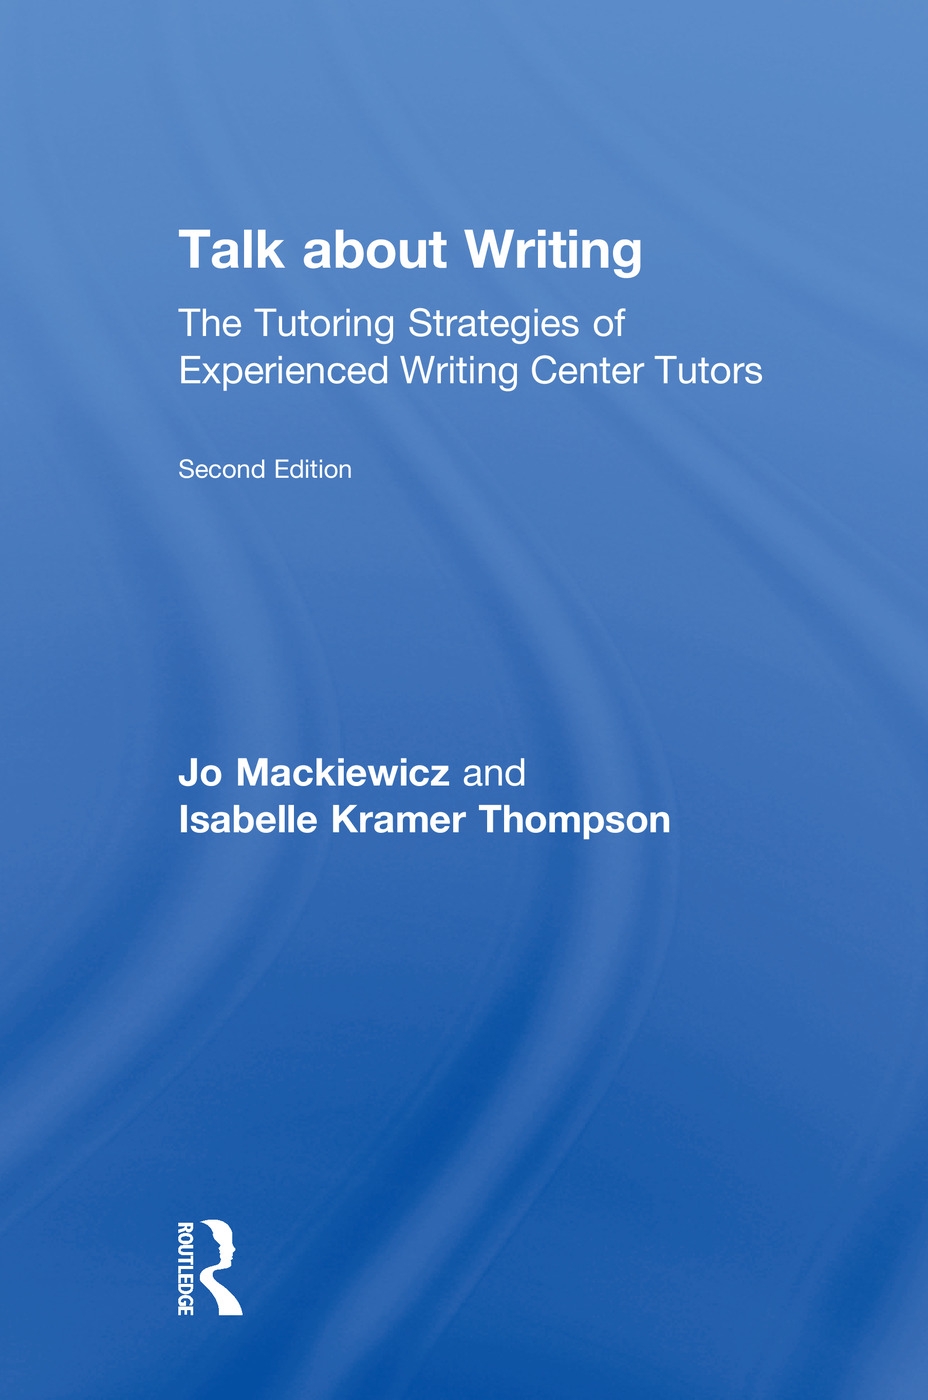 Talk about Writing: The Tutoring Strategies of Experienced Writing Center Tutors